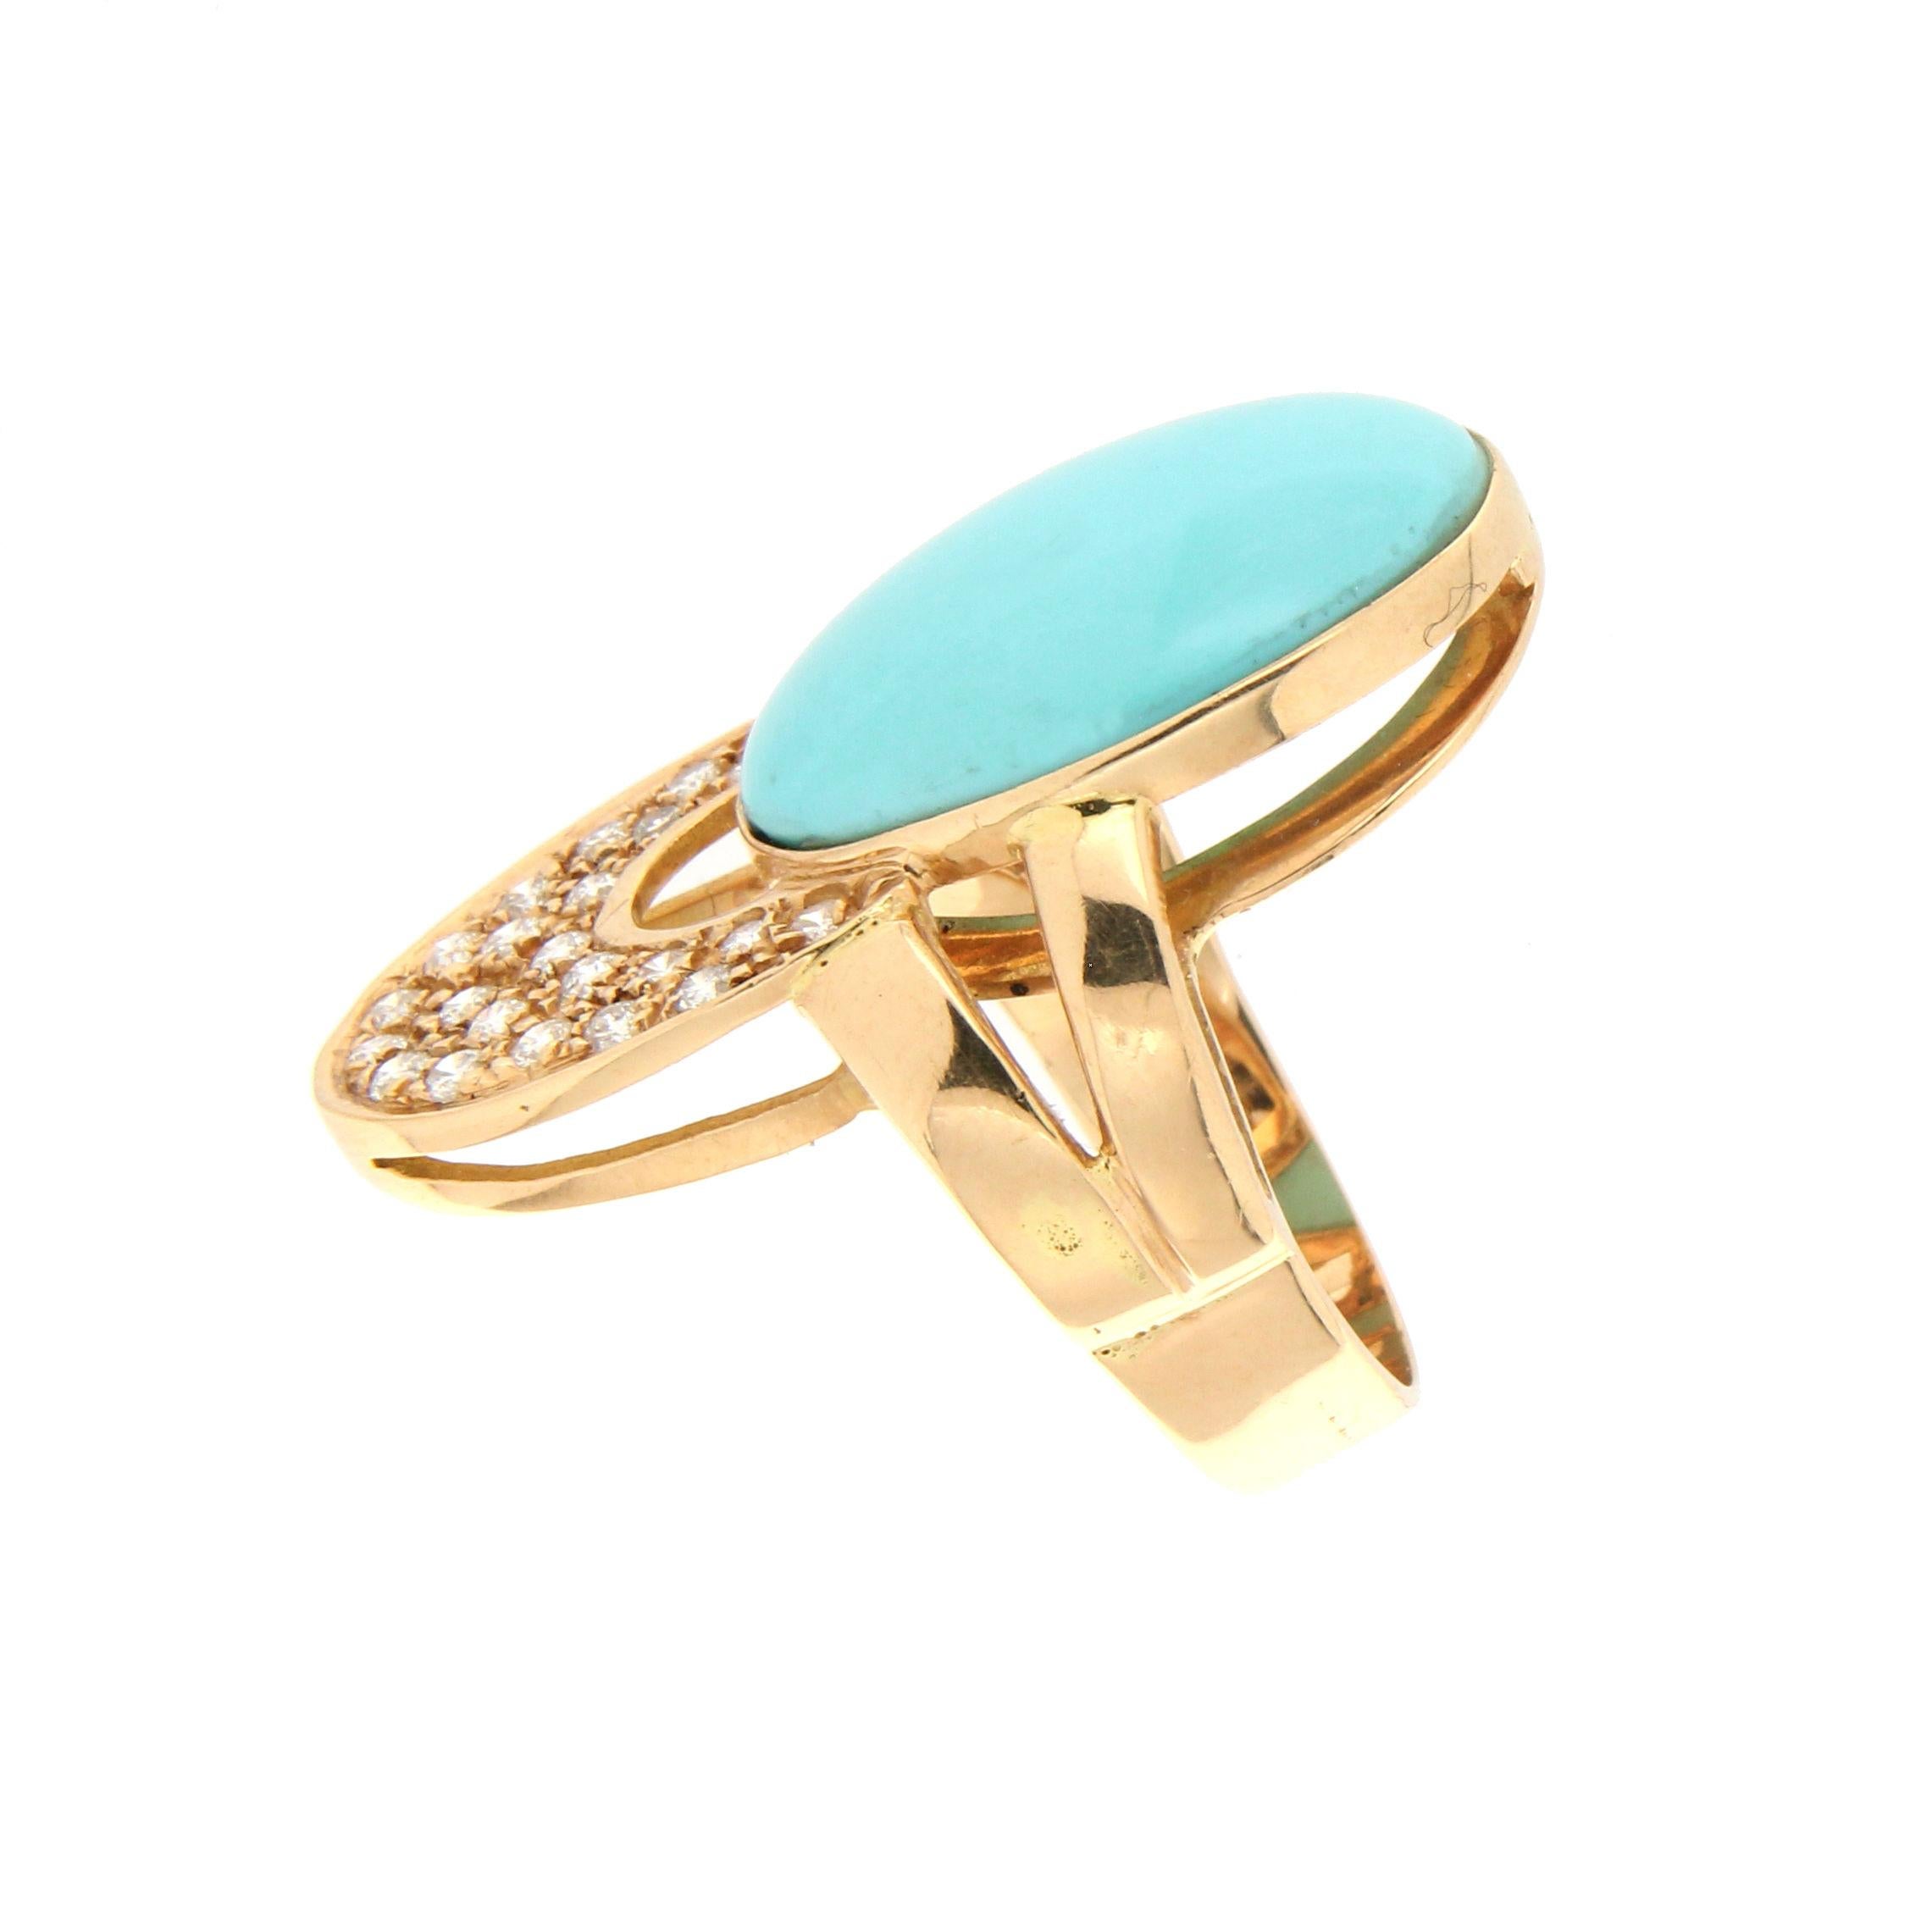 Brilliant Cut Handcraft Turquoise 18 Karat Yellow Gold Diamonds Cocktail Ring For Sale